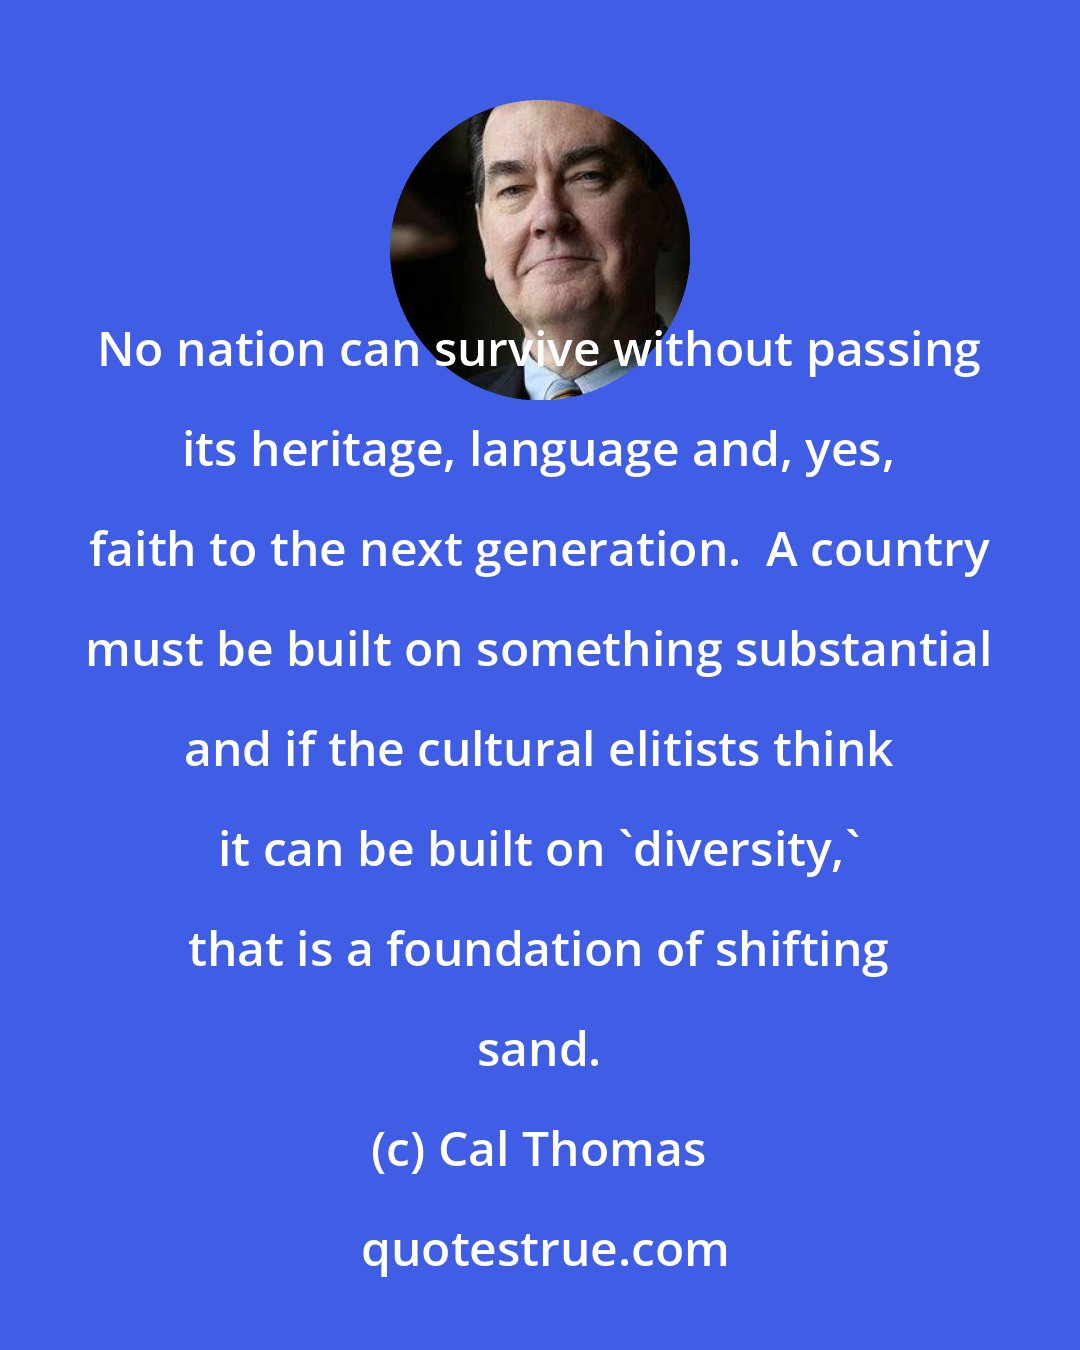 Cal Thomas: No nation can survive without passing its heritage, language and, yes, faith to the next generation.  A country must be built on something substantial and if the cultural elitists think it can be built on 'diversity,' that is a foundation of shifting sand.